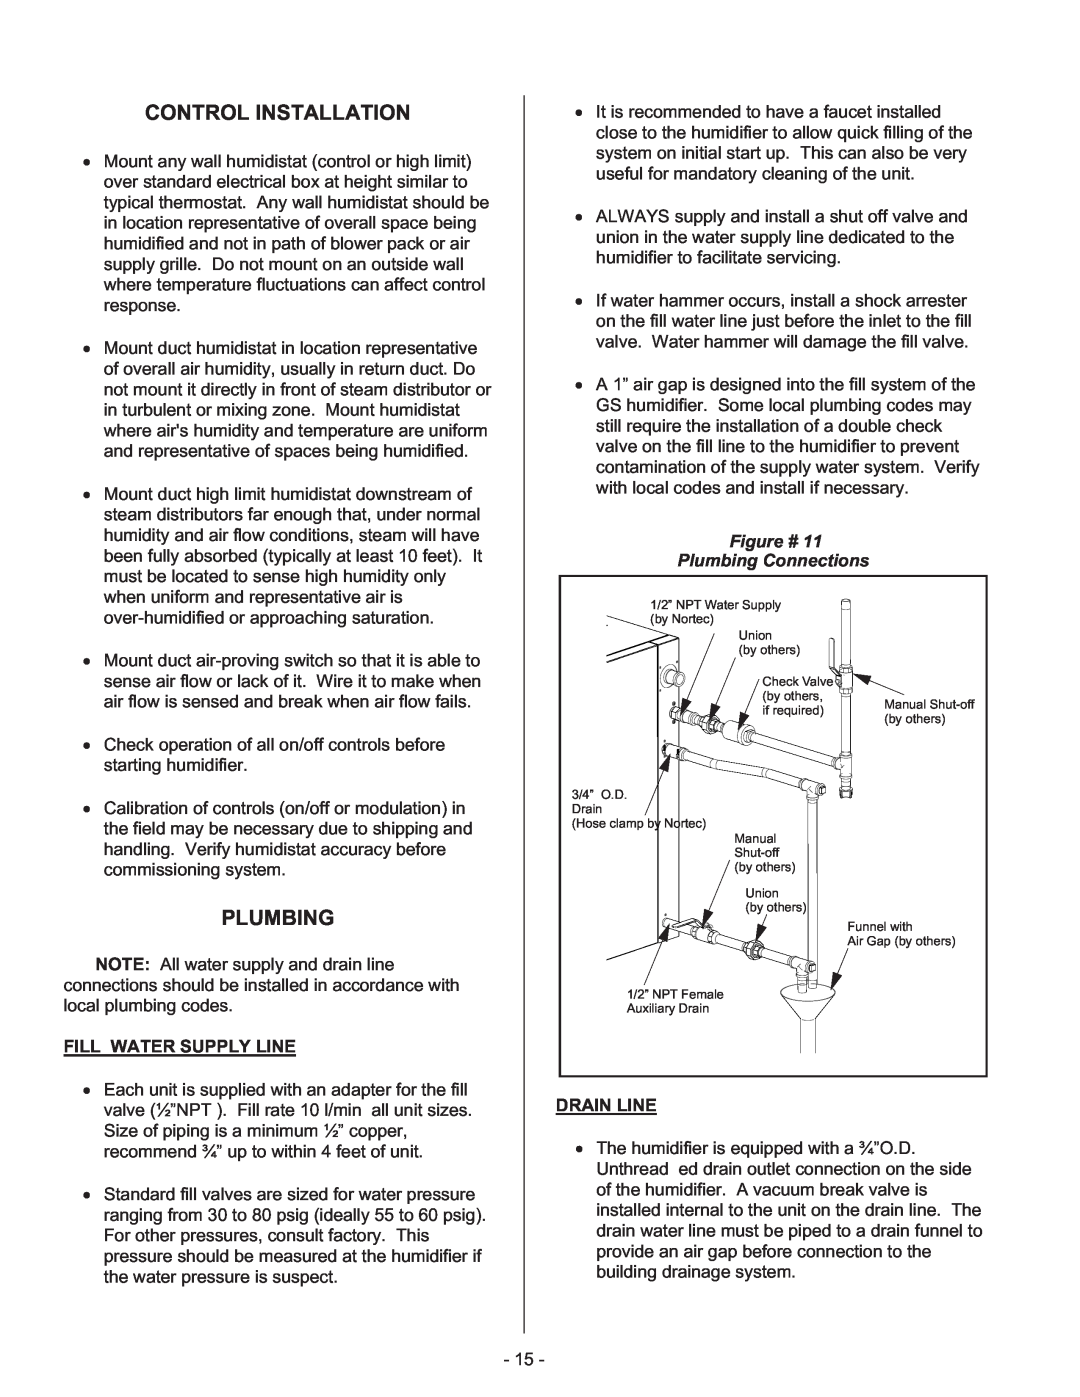 Nortec Industries GS Series manual Control Installation, Figure # Plumbing Connections 